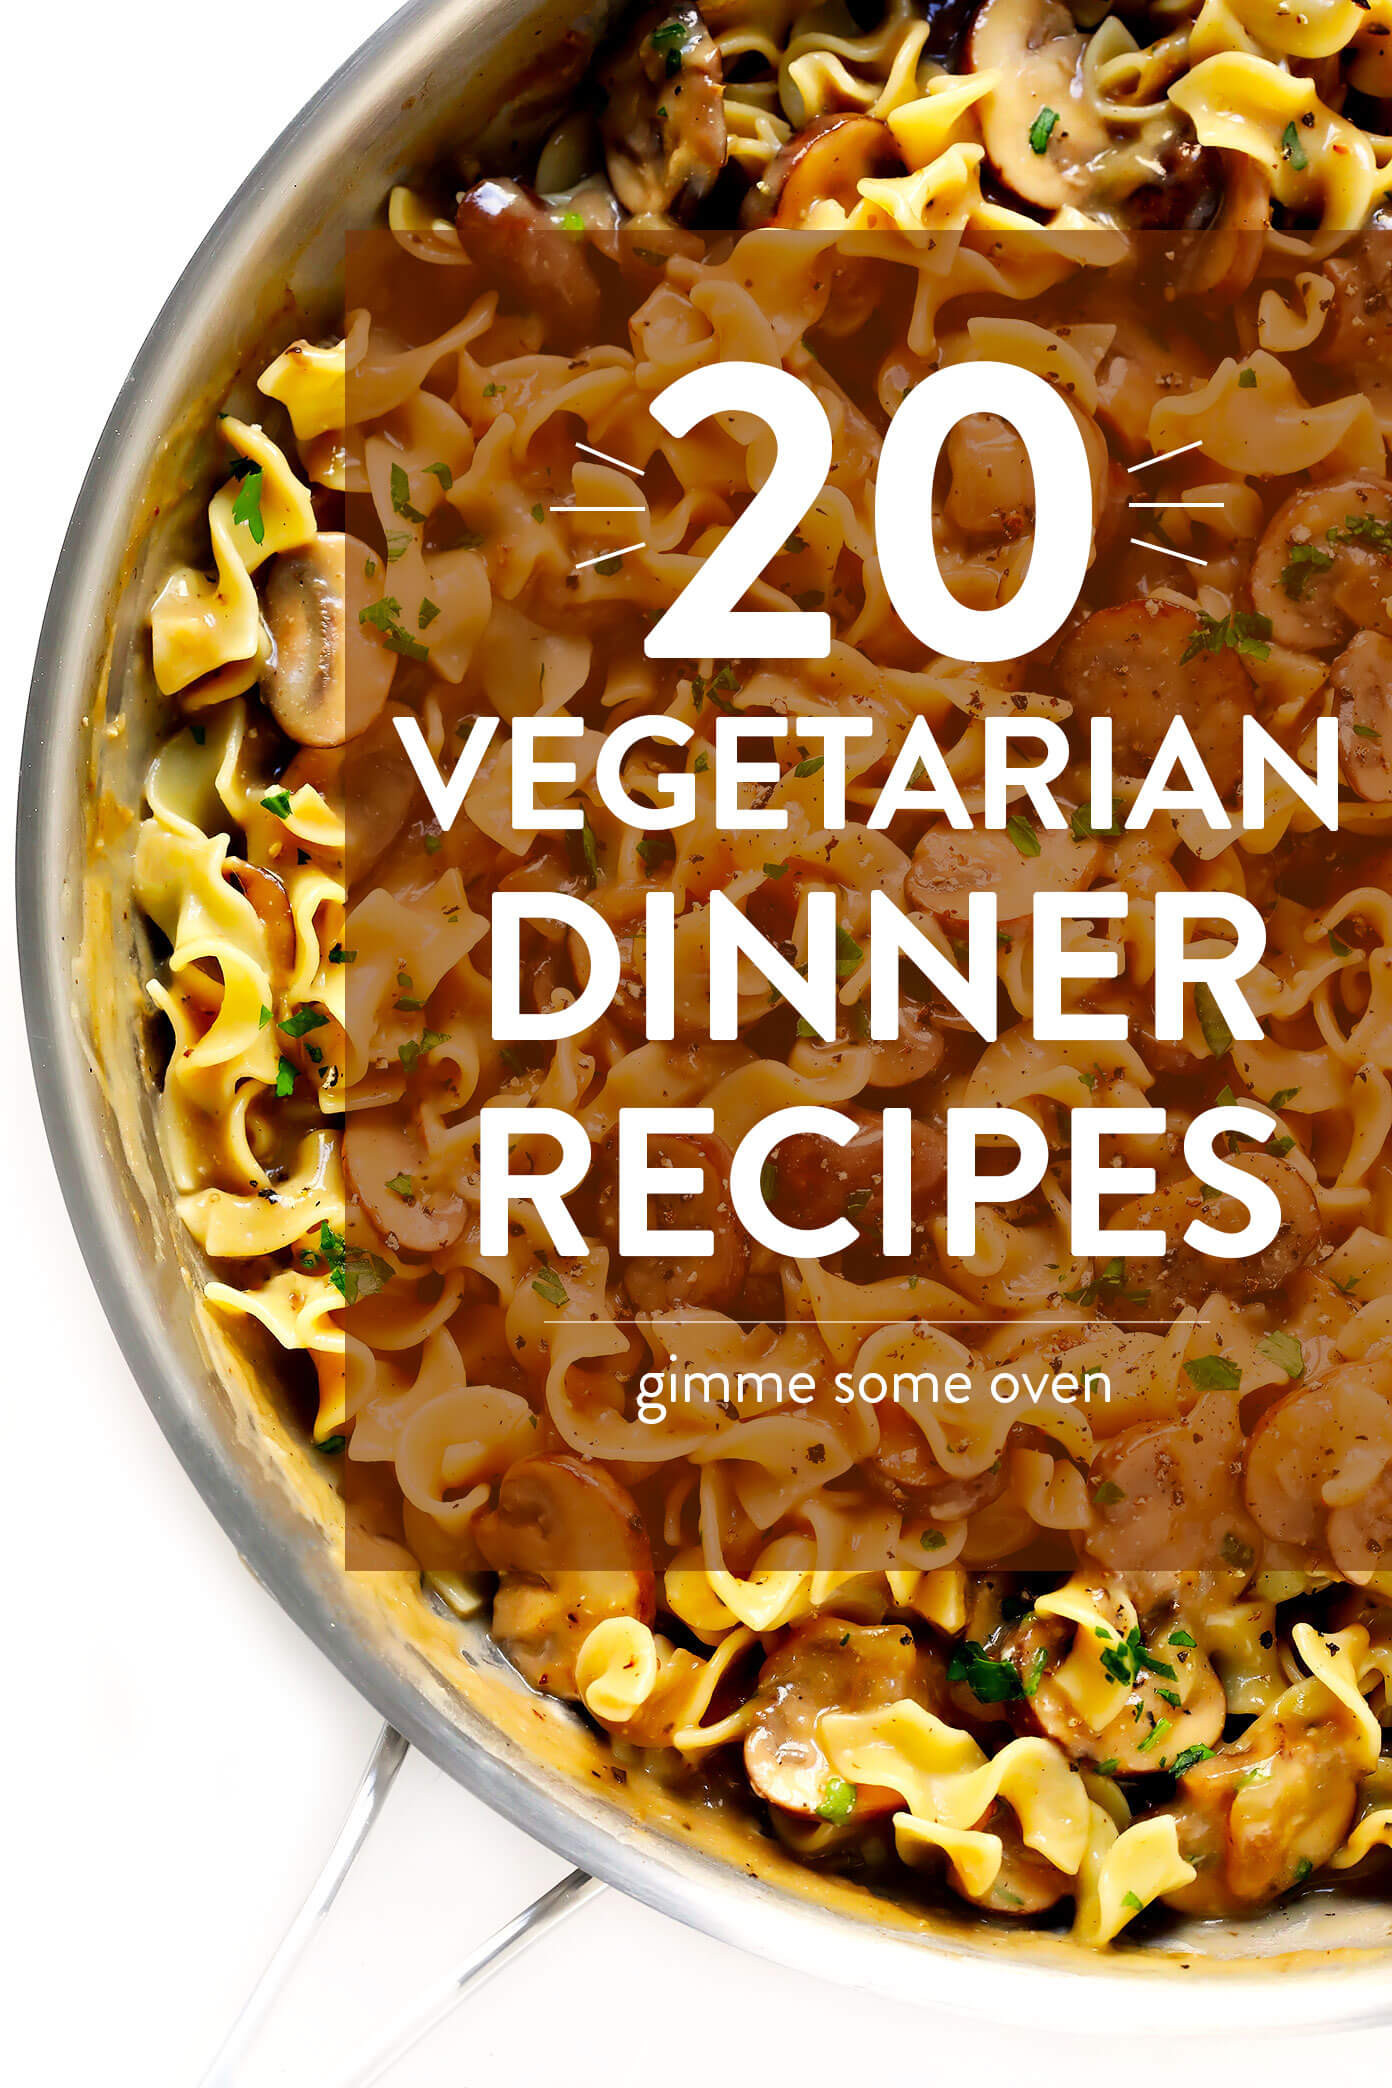 Delicious Vegetarian Dinner Recipes
 20 Ve arian Dinner Recipes That Everyone Will LOVE